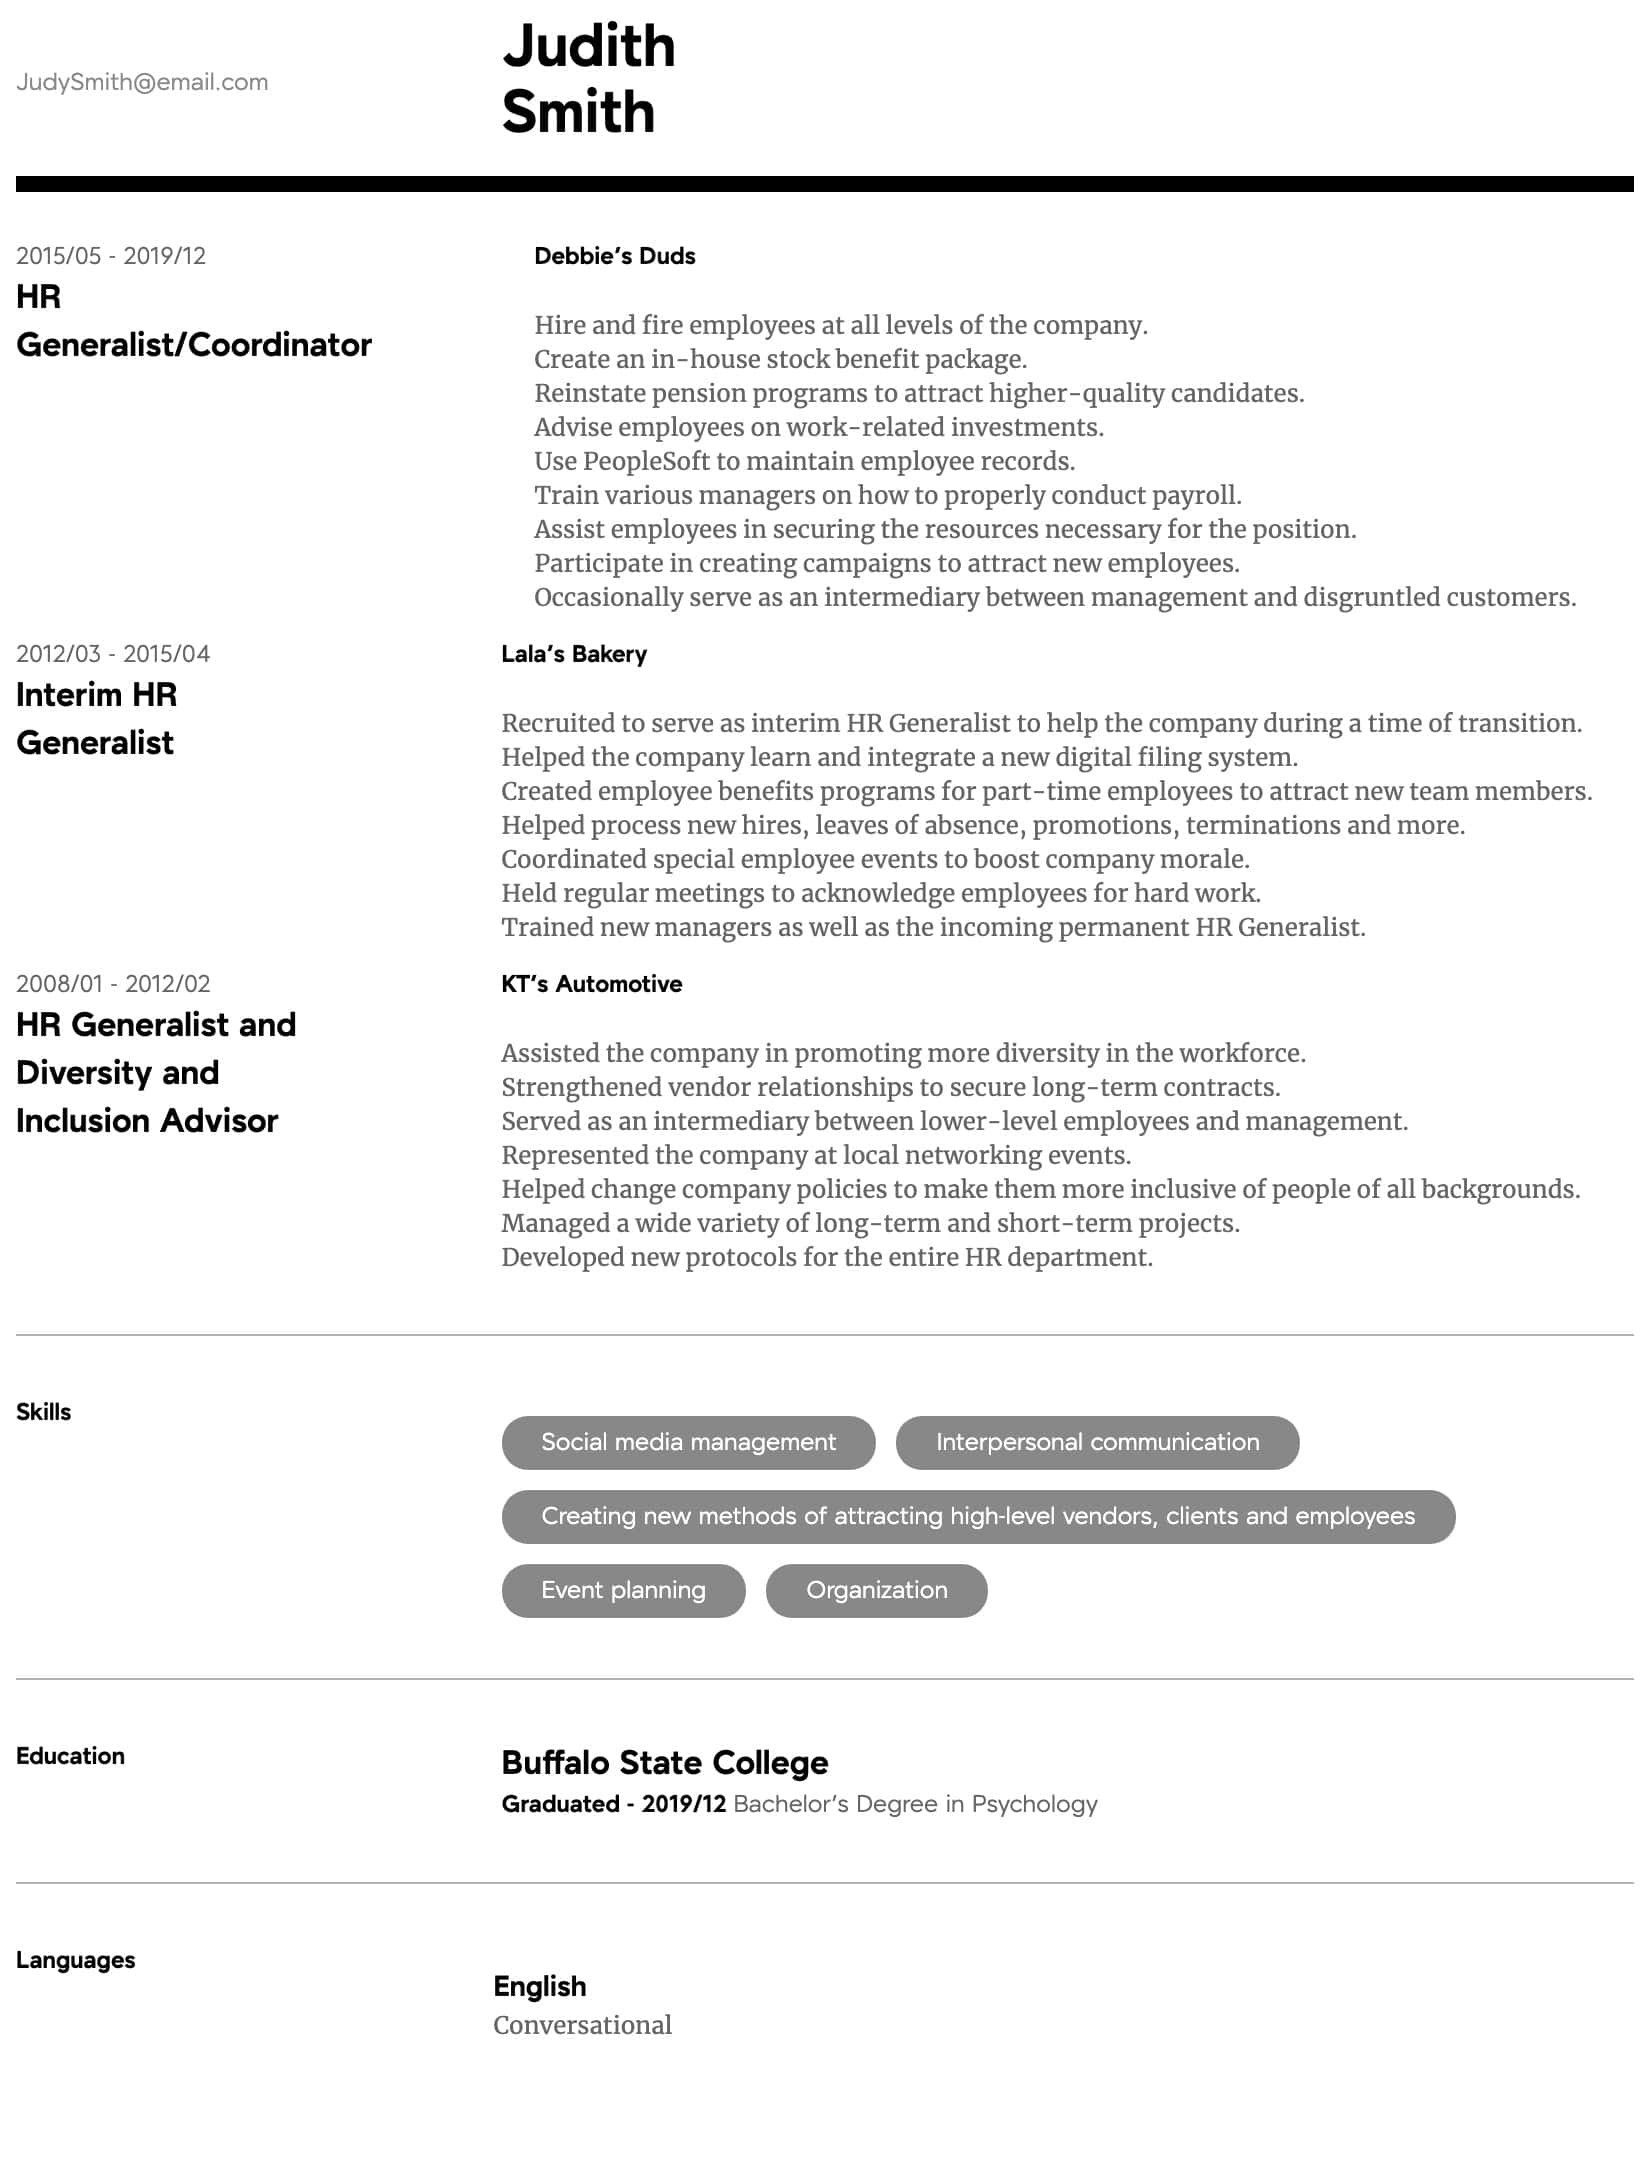 Human Resources Resume Sample Entry Level Hr Generalist Resume Samples All Experience Levels Resume.com …